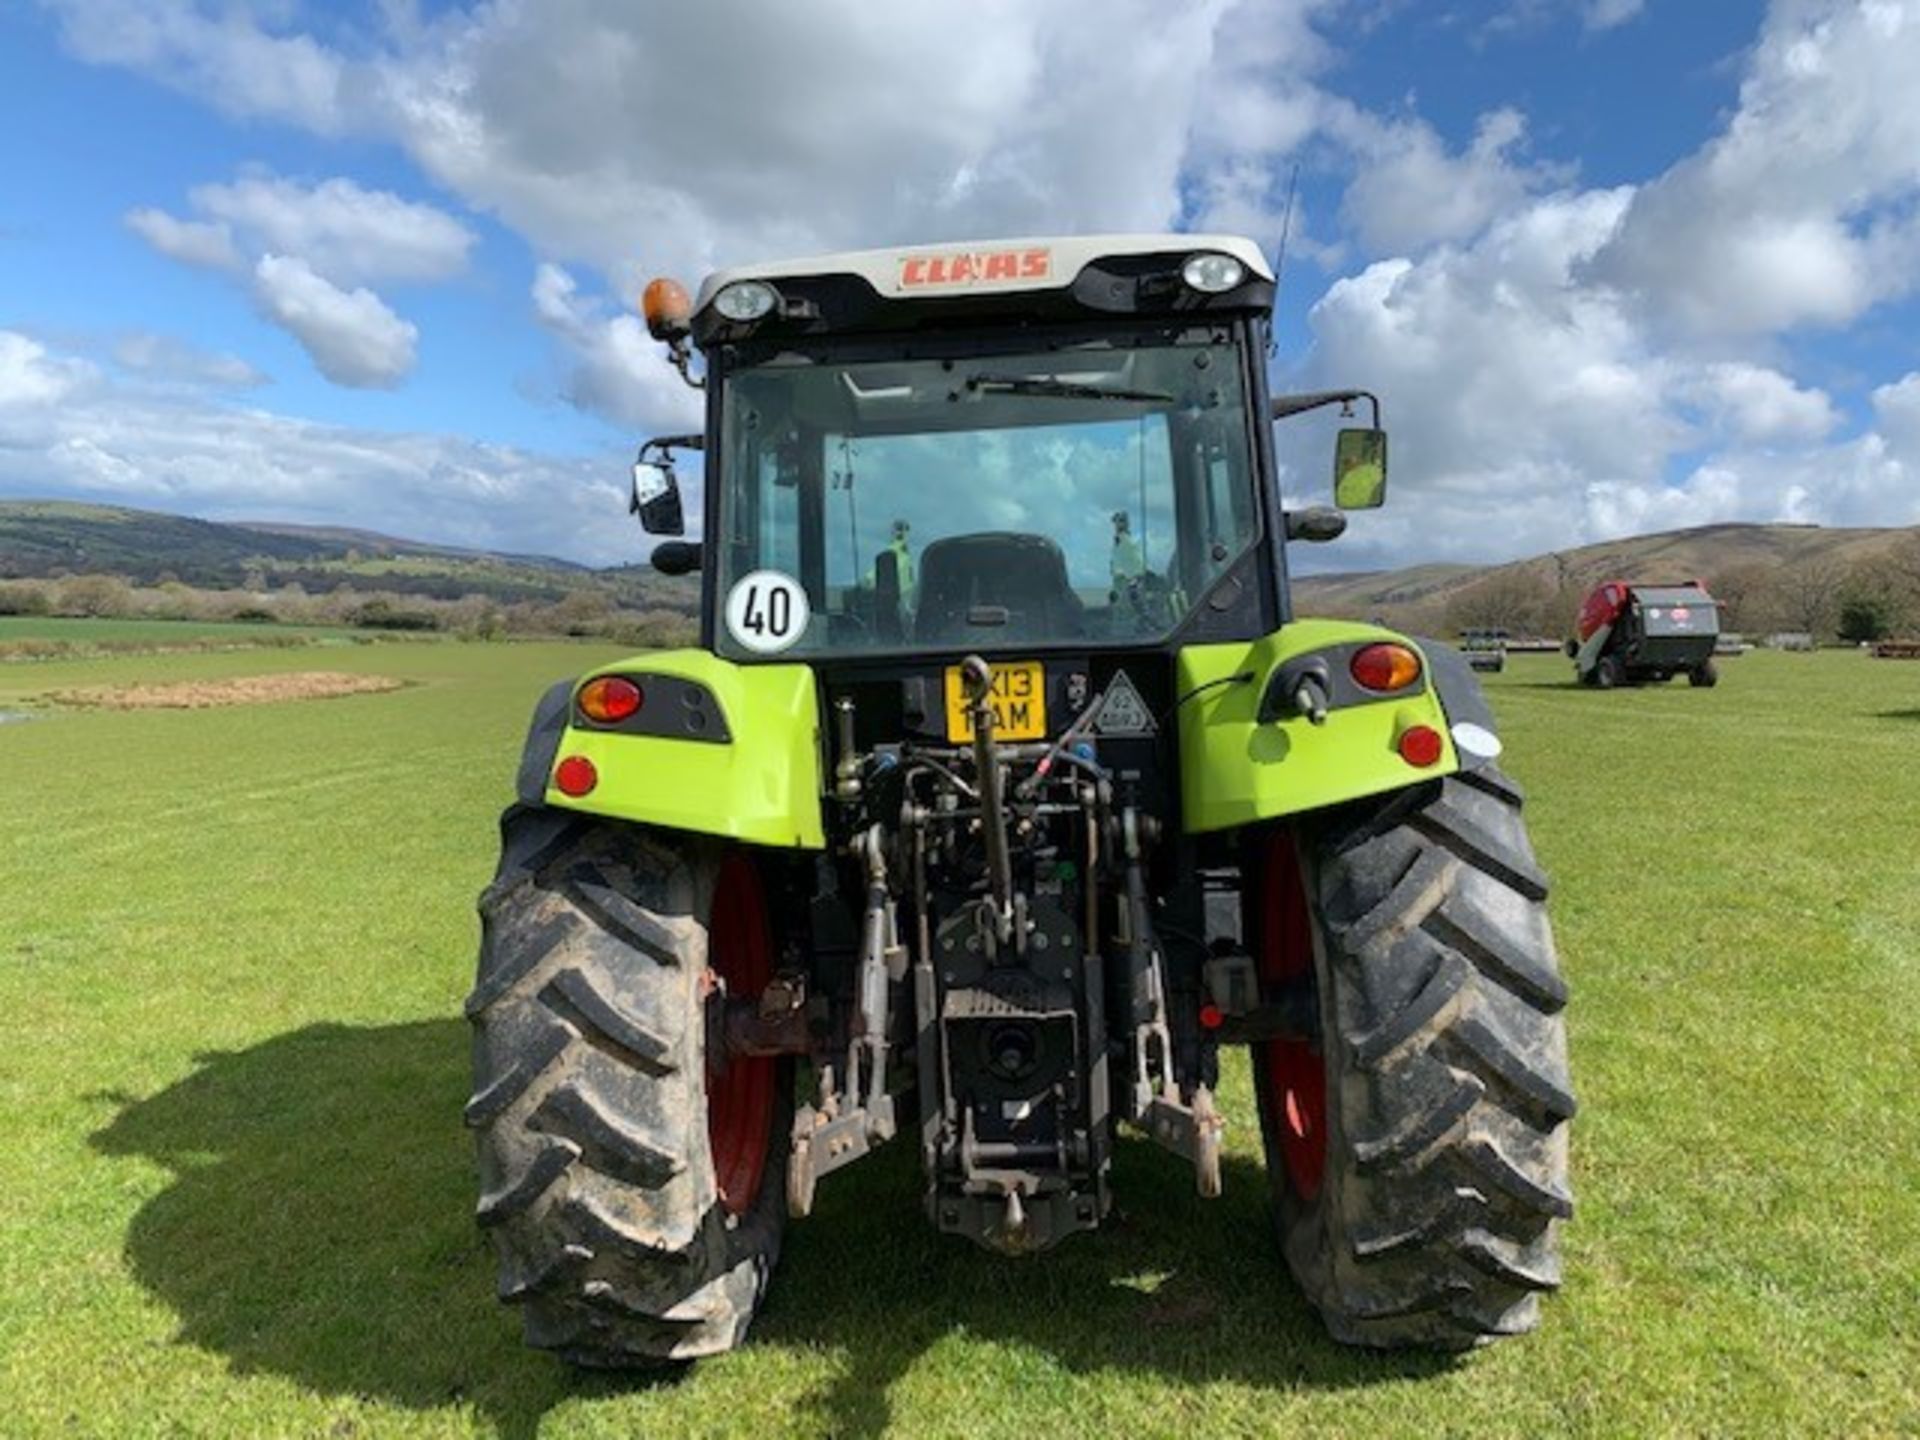 CLAAS AXOS 340 4WD TRACTOR REG.DX13 FAM FIRST REG 14/5/13 105HP C/W CLAAS FL100 LOADER AND A10 - Image 3 of 7